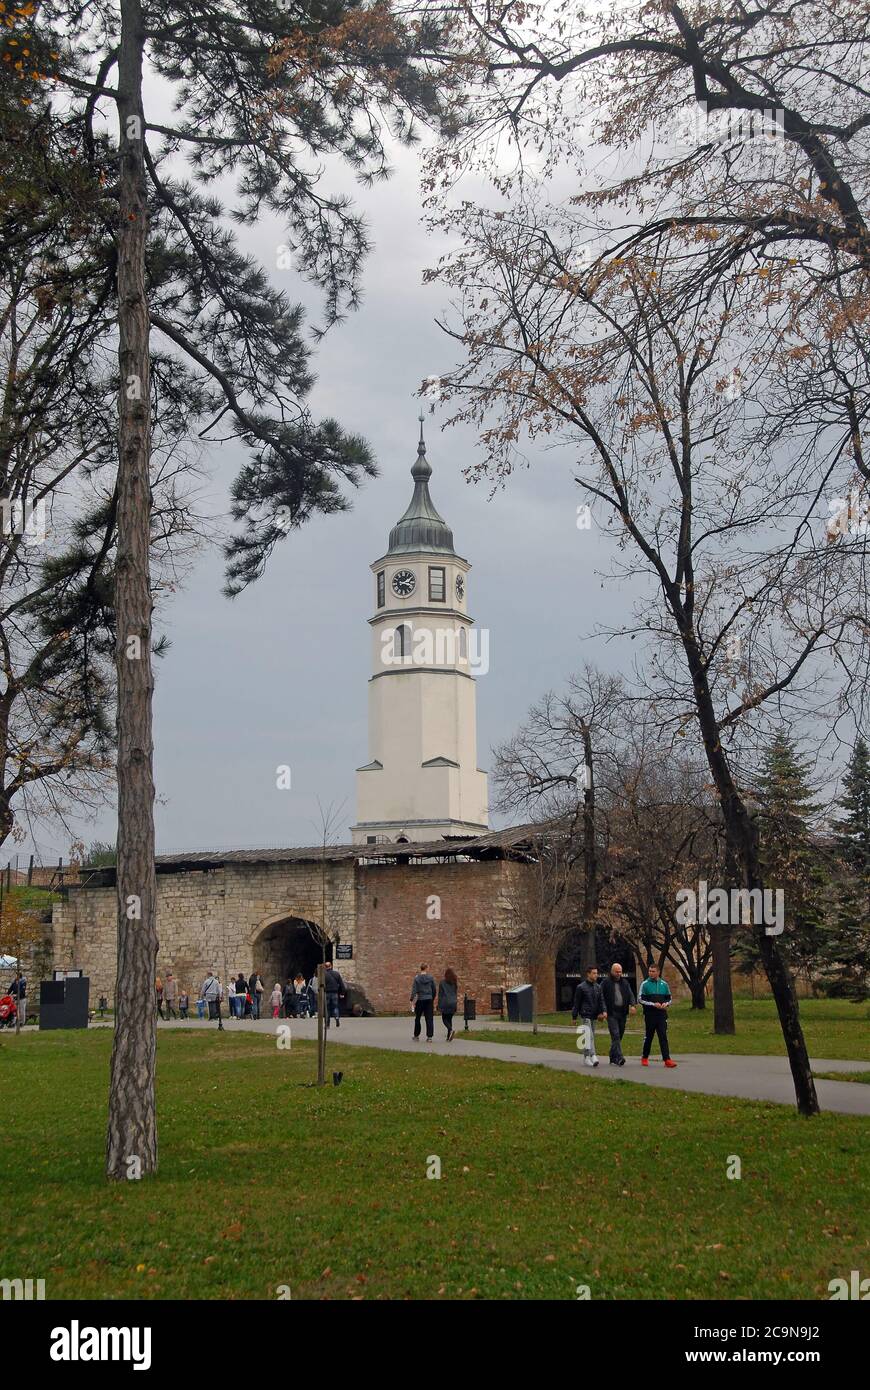 The clock tower in Kalemagdan Park near Belgrade Fortress in Belgrade, Serbia. The tower is part of the Clock Gate and Baroque Gate complex. Stock Photo